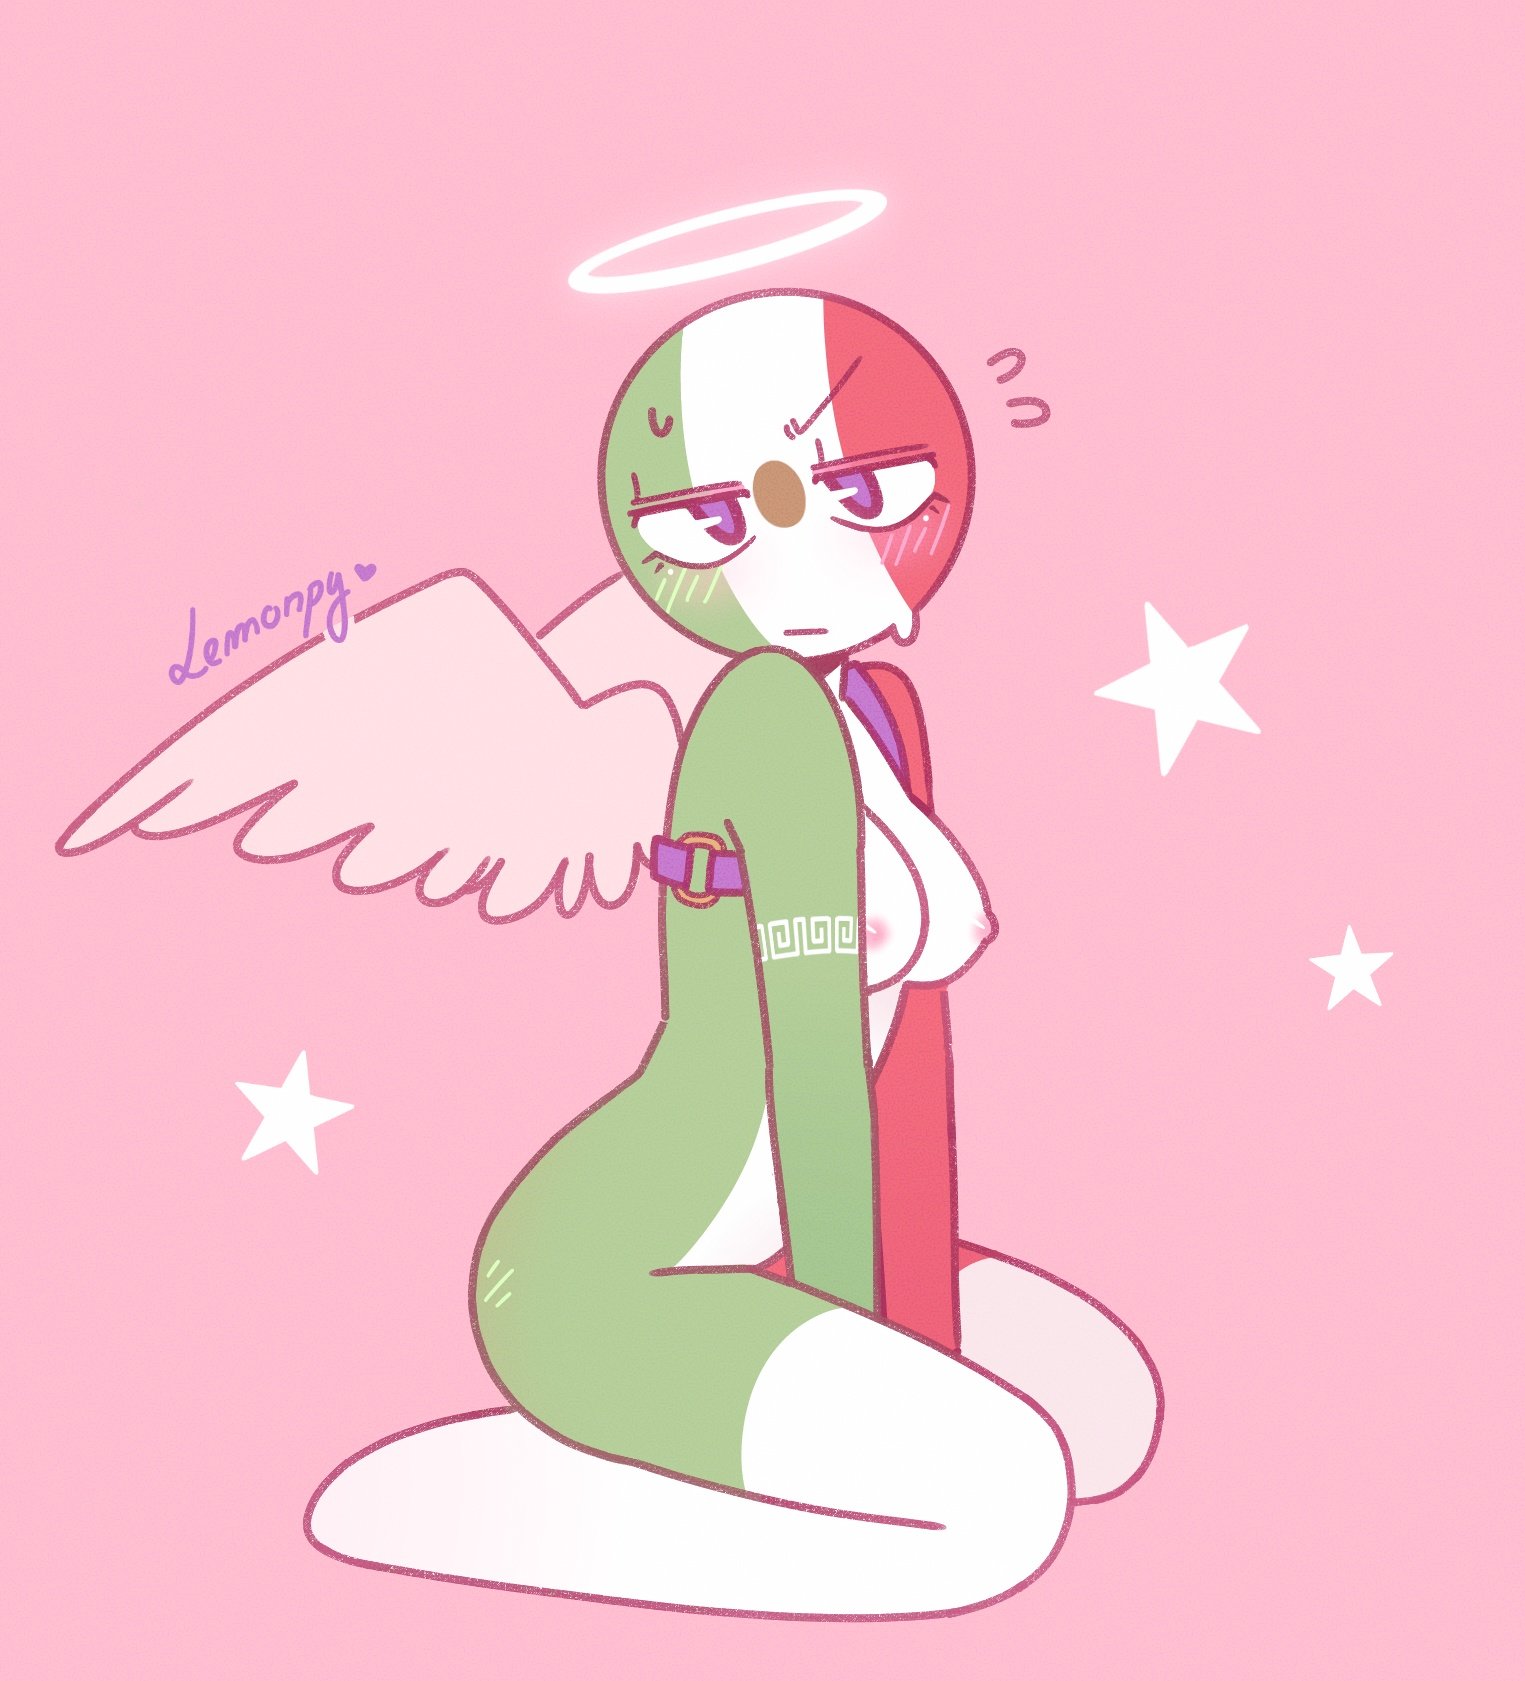 mexico (countryhumans), countryhumans, breasts, countryhumans girl, looking...